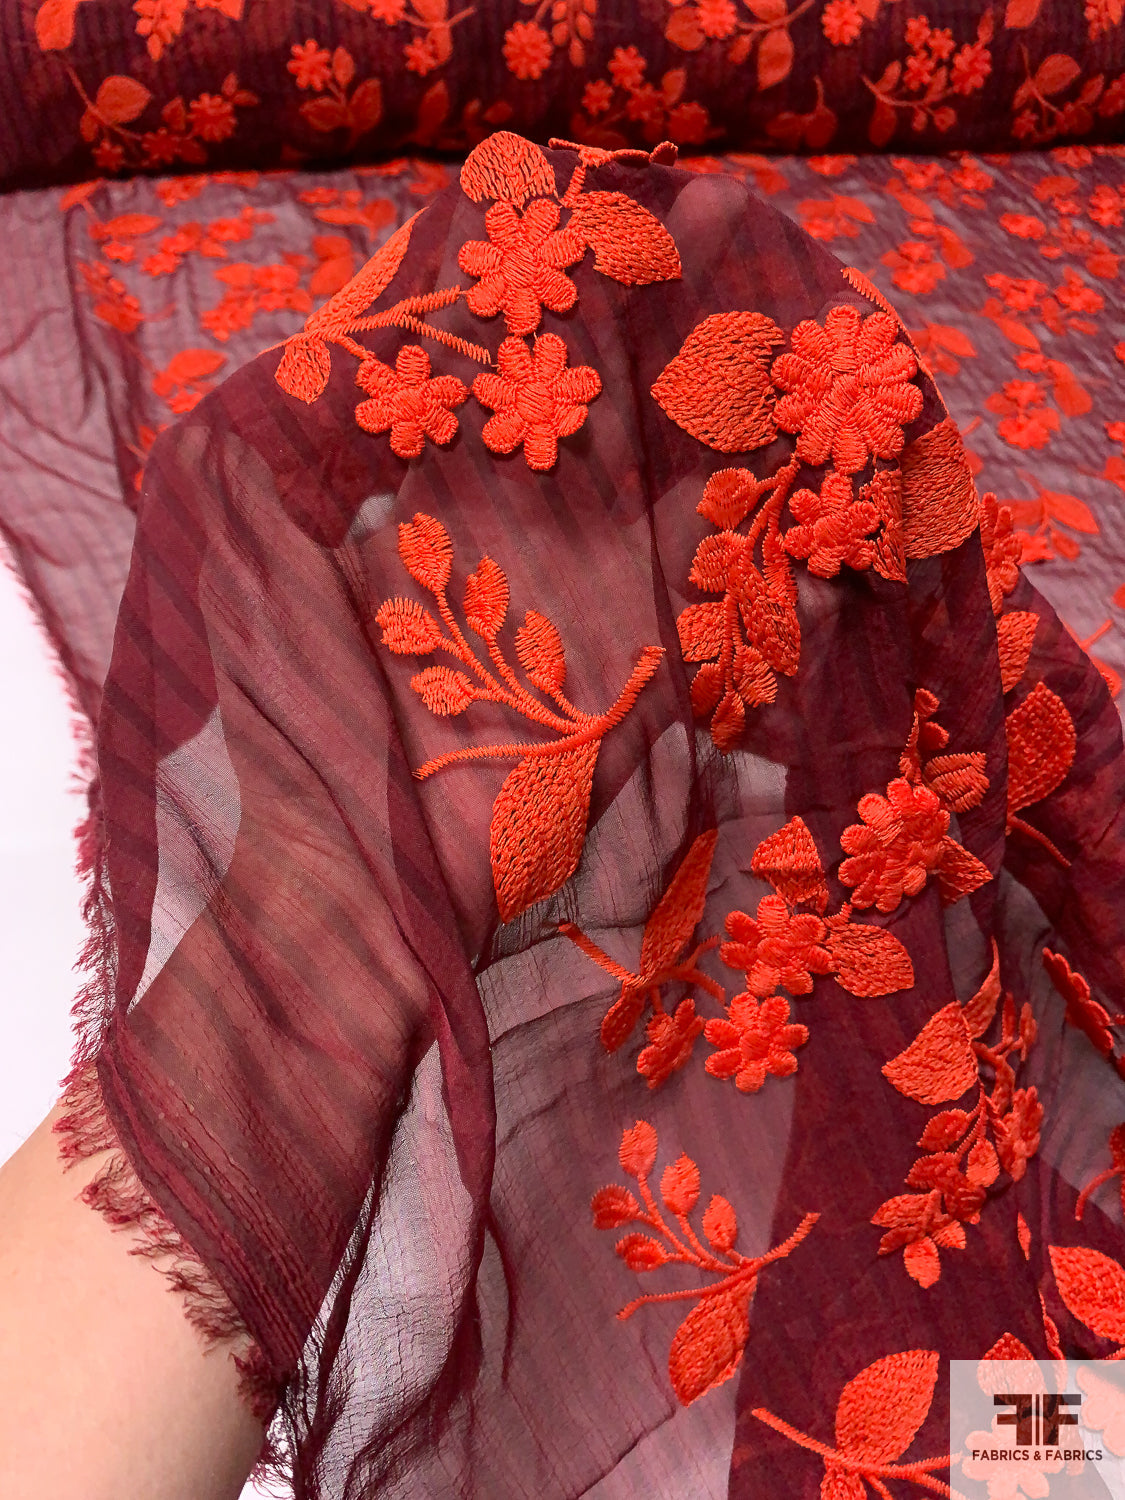 Floral Embroidery and Appliqué on Striped Polyester Chiffon - Red / Maroon / Burgundy